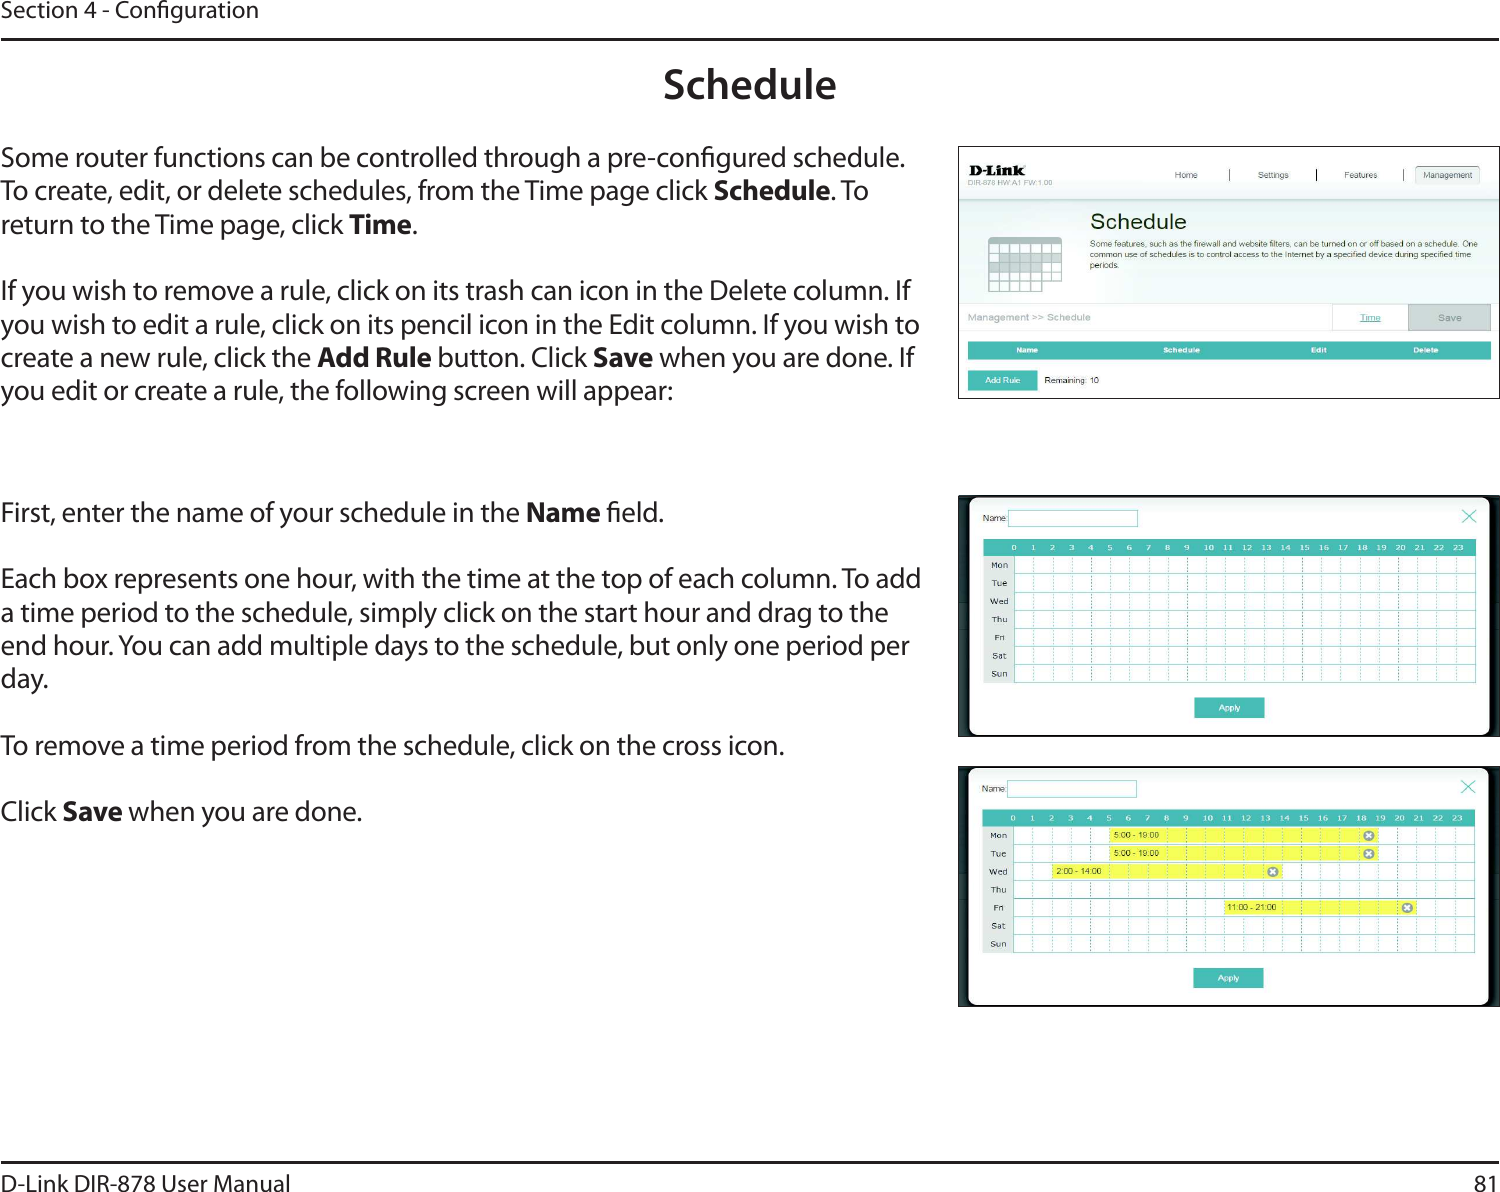 81D-Link DIR-878 User ManualSection 4 - CongurationScheduleSome router functions can be controlled through a pre-congured schedule. To create, edit, or delete schedules, from the Time page click Schedule. To return to the Time page, click Time.If you wish to remove a rule, click on its trash can icon in the Delete column. If you wish to edit a rule, click on its pencil icon in the Edit column. If you wish to create a new rule, click the &quot;EE3VMFbutton. Click Save when you are done. If you edit or create a rule, the following screen will appear:First, enter the name of your schedule in the Name eld.Each box represents one hour, with the time at the top of each column. To add a time period to the schedule, simply click on the start hour and drag to the end hour. You can add multiple days to the schedule, but only one period per day.To remove a time period from the schedule, click on the cross icon.Click Save when you are done.